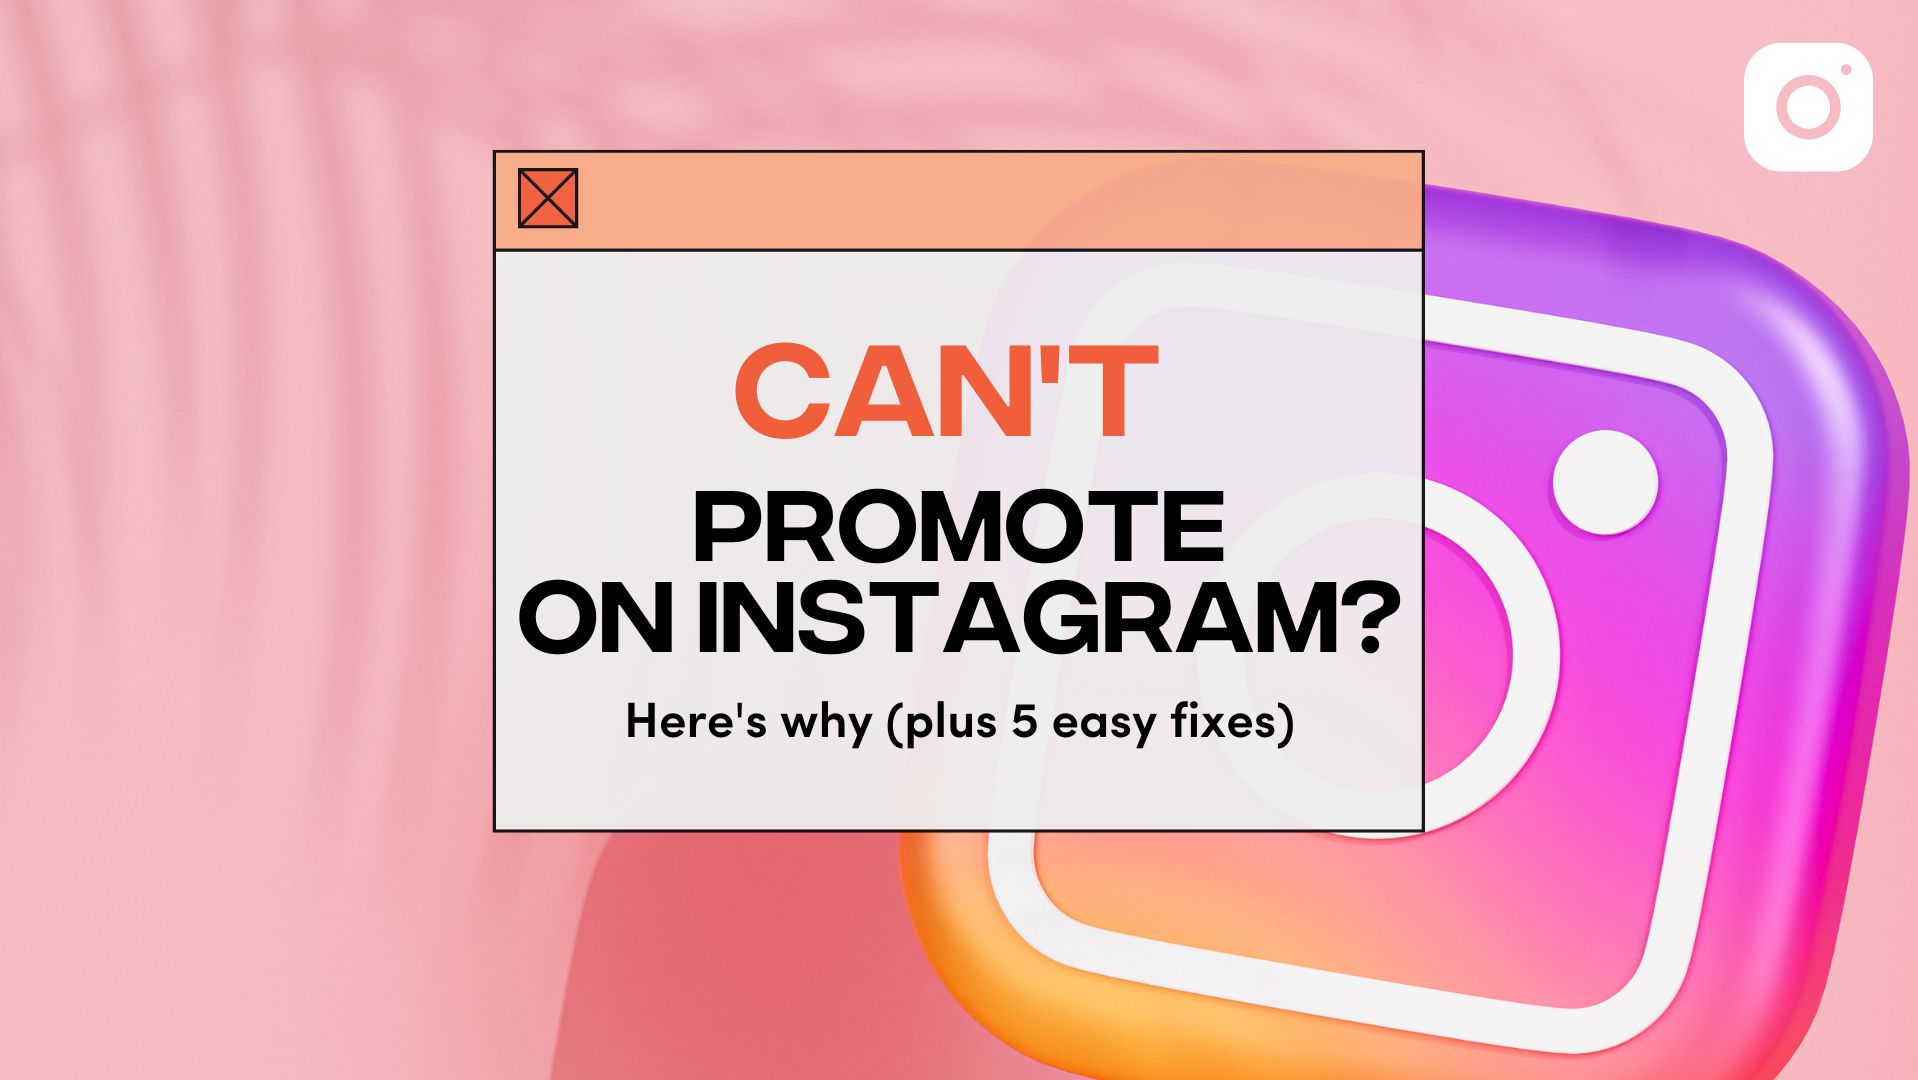 Can't Promote on Instagram? Here's Why (Plus 5 Easy Fixes)